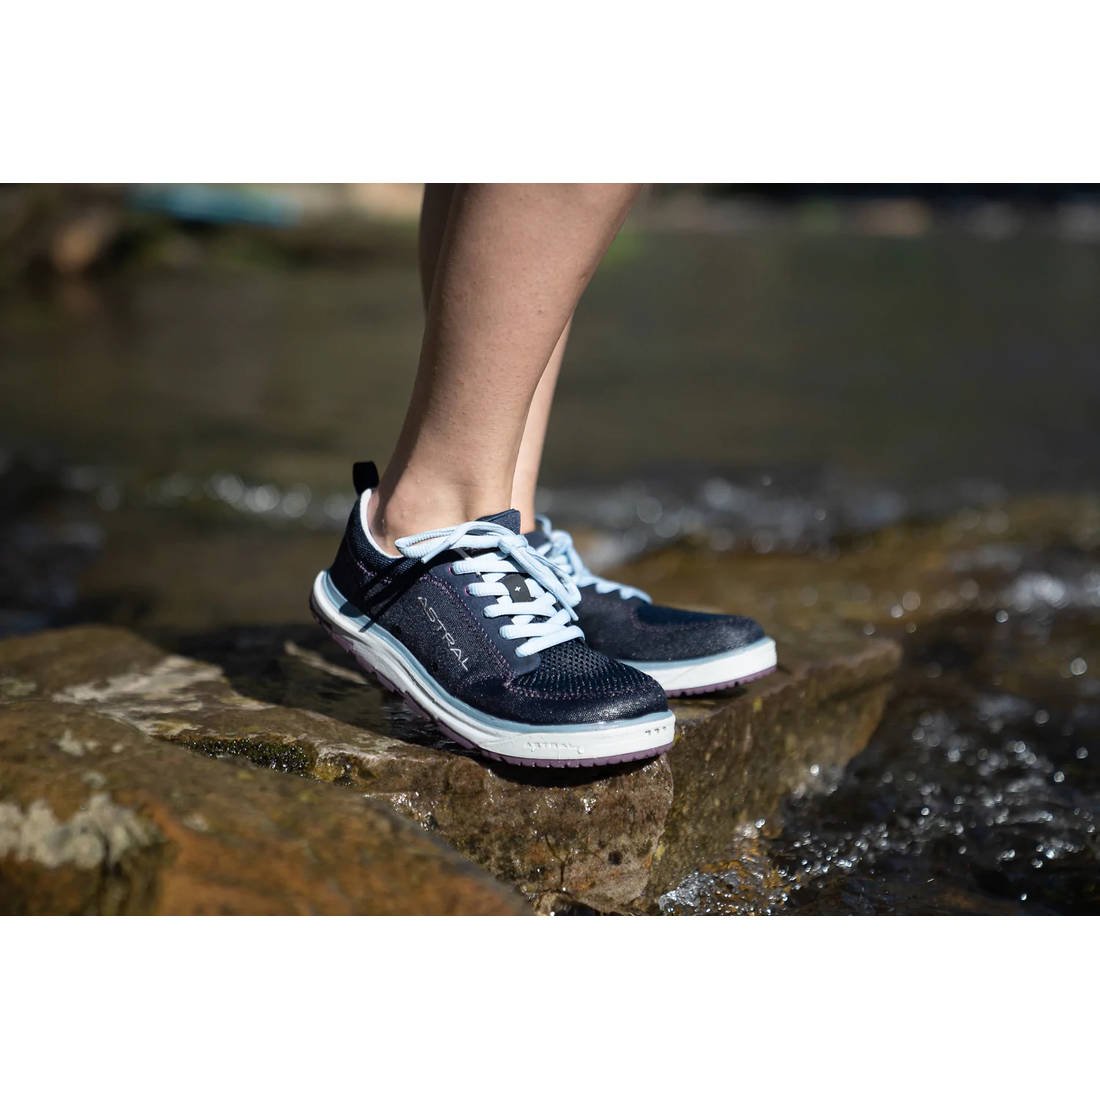 Brewess 2.0 - Women's from Astral | Water Shoes | BackcountryGear.com